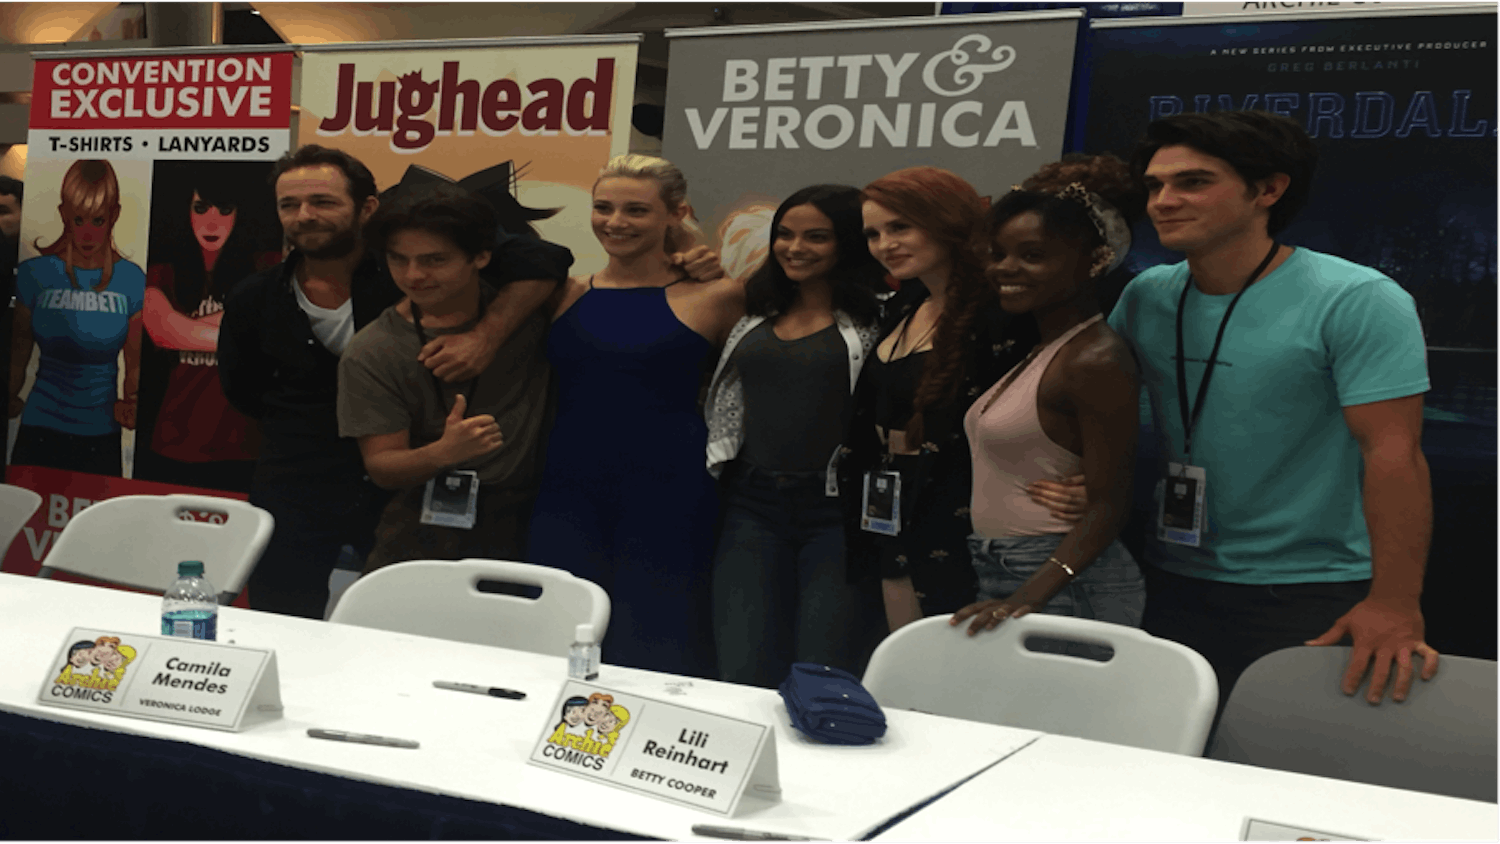 The cast of "Riverdale" at the 2016 San Diego Comic-Con